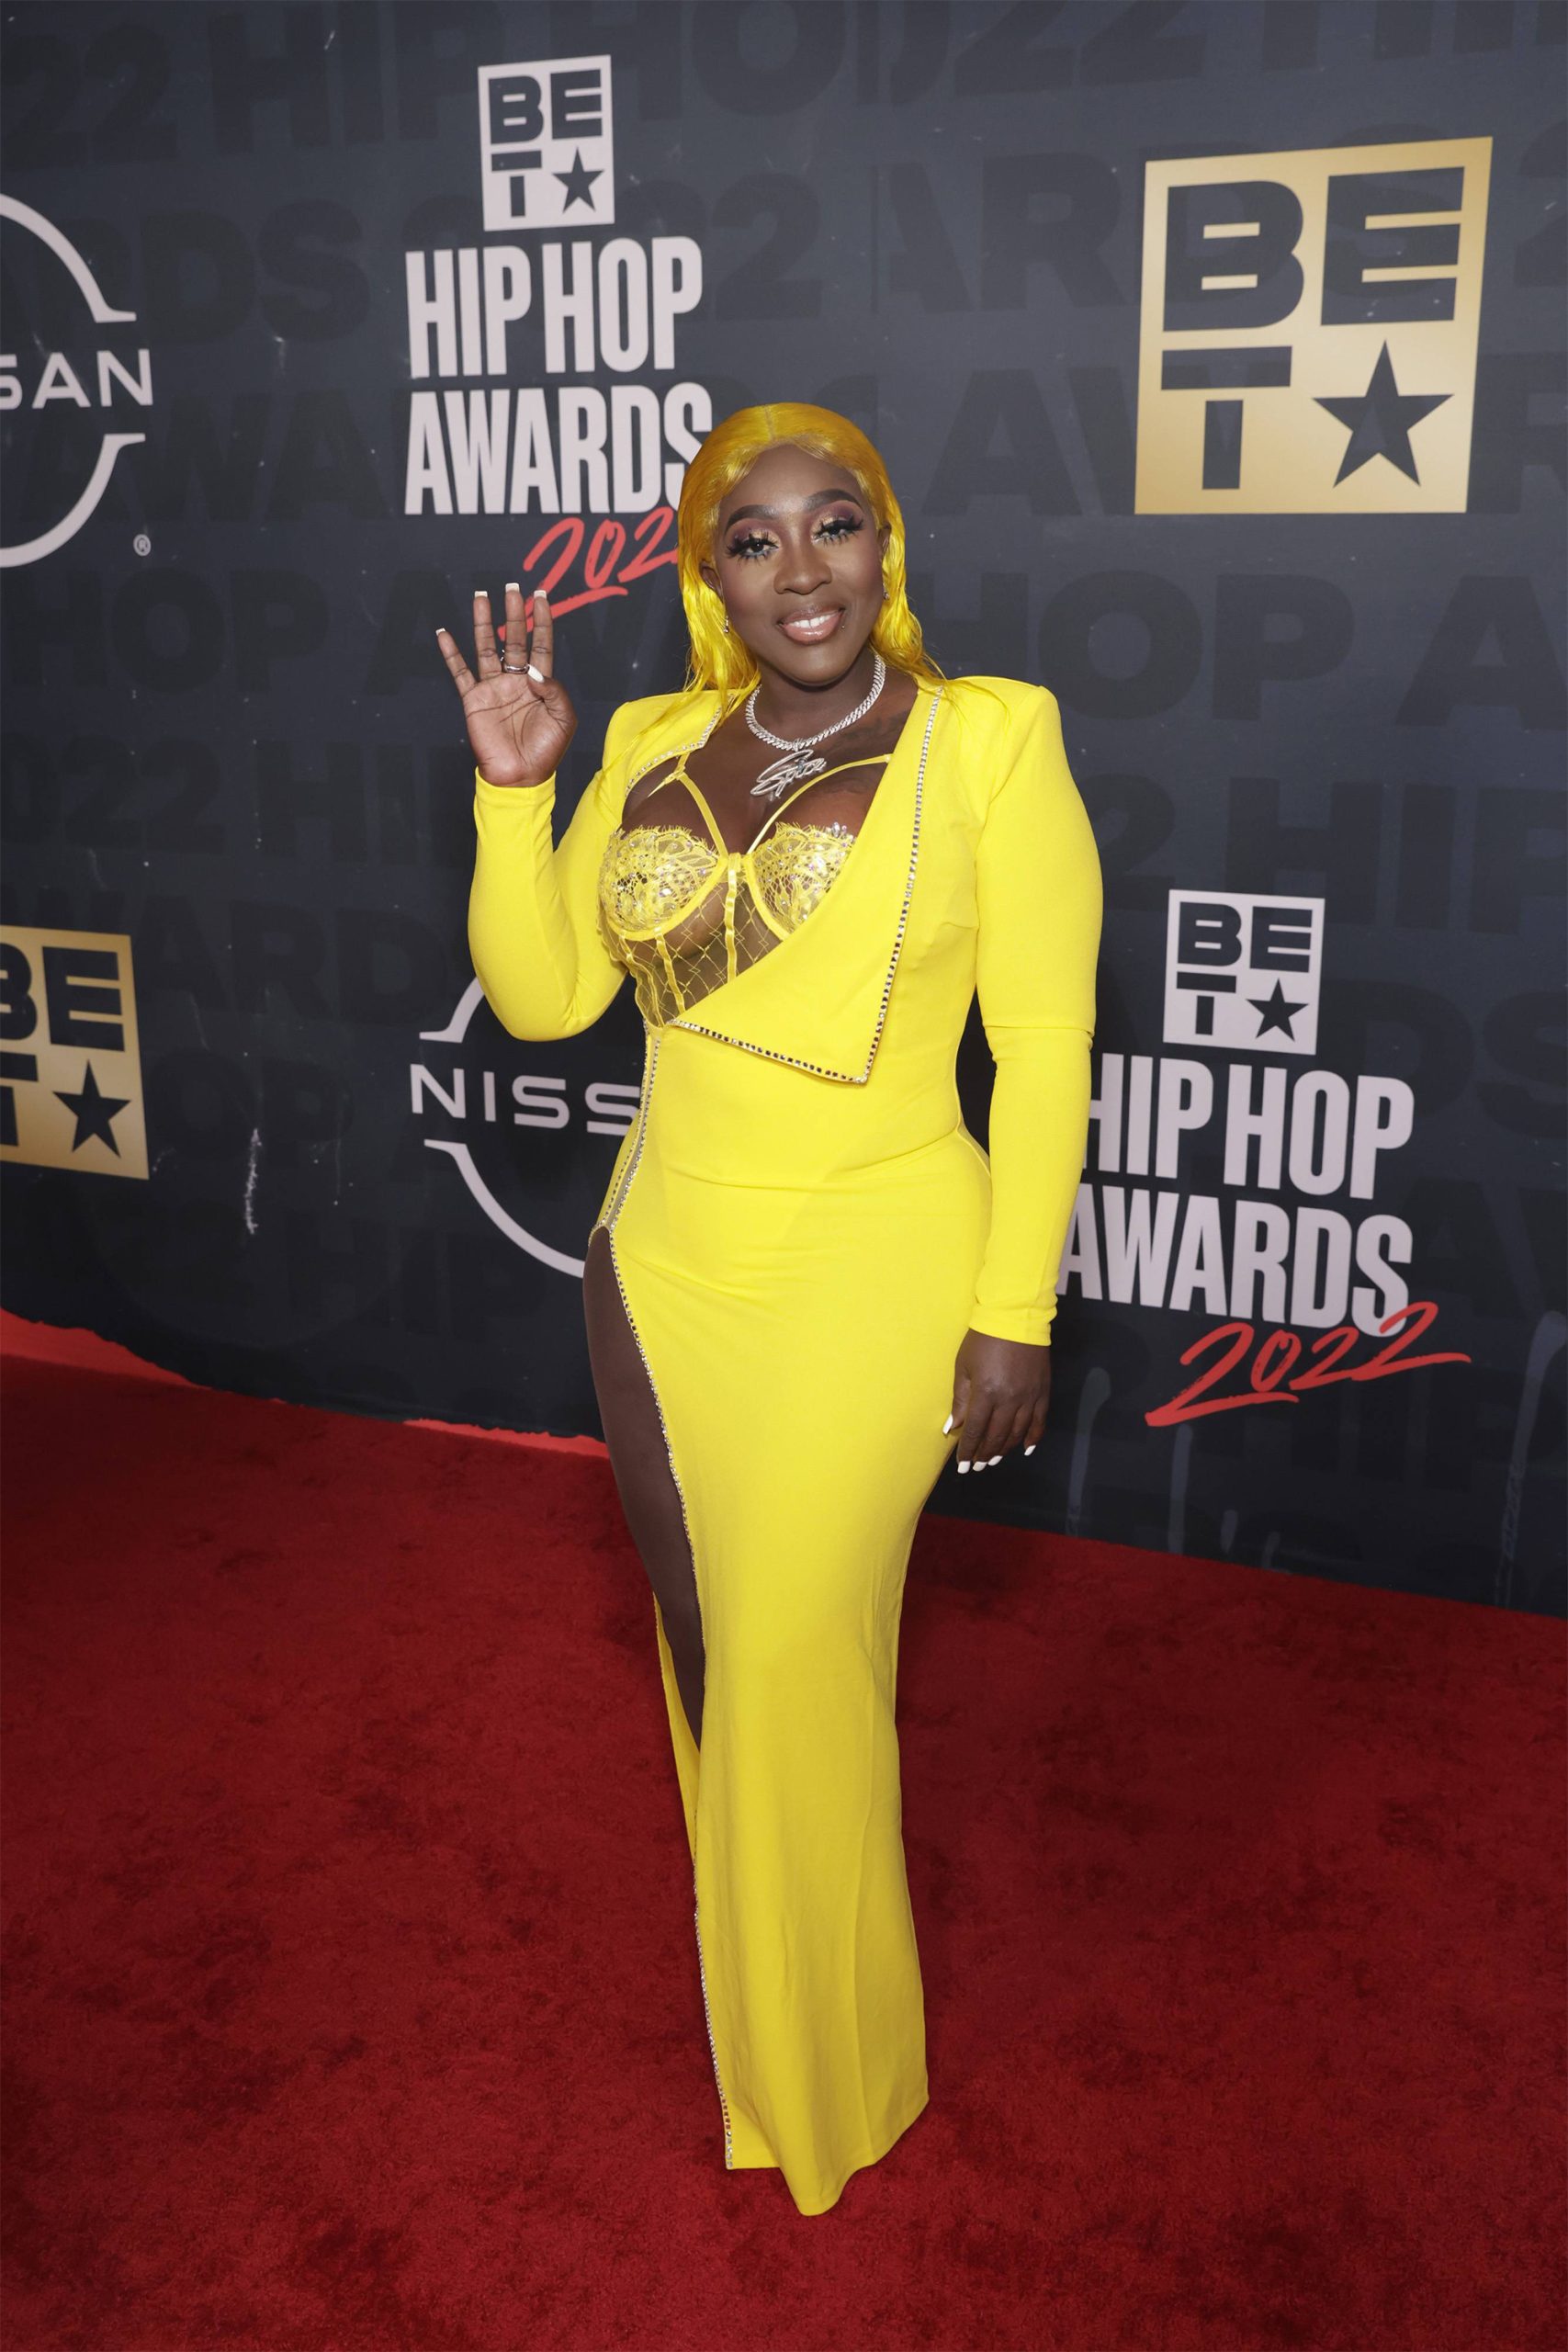 Spice Slays In Canary Ensemble At The BET Hip Hop Awards 2022